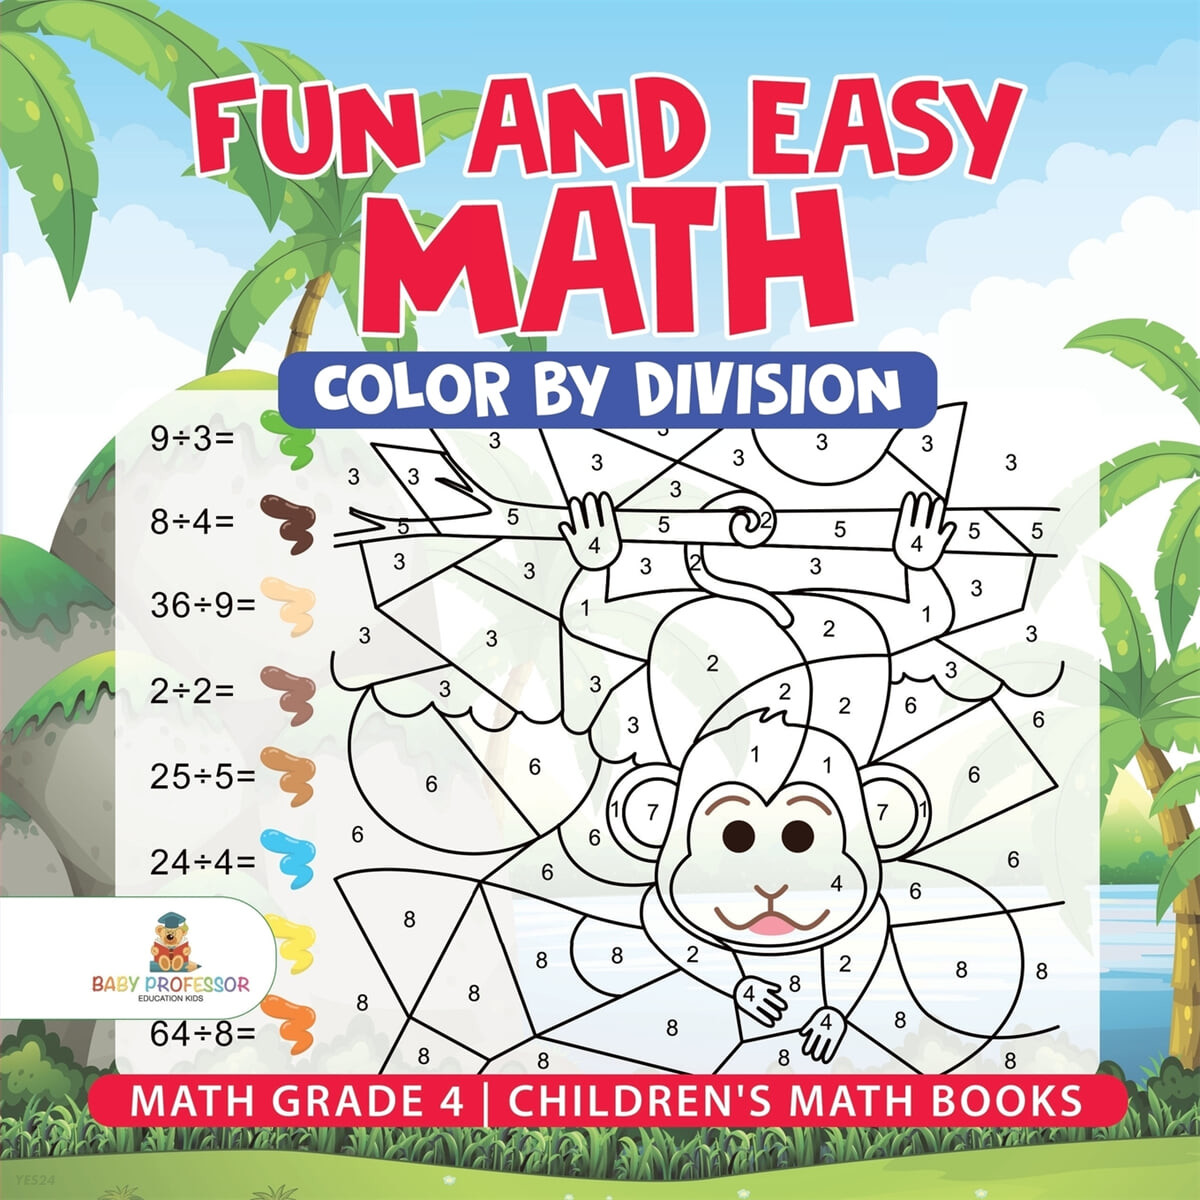 Fun and Easy Math: Color by Division - Math Grade 4 - Children’s Math Books